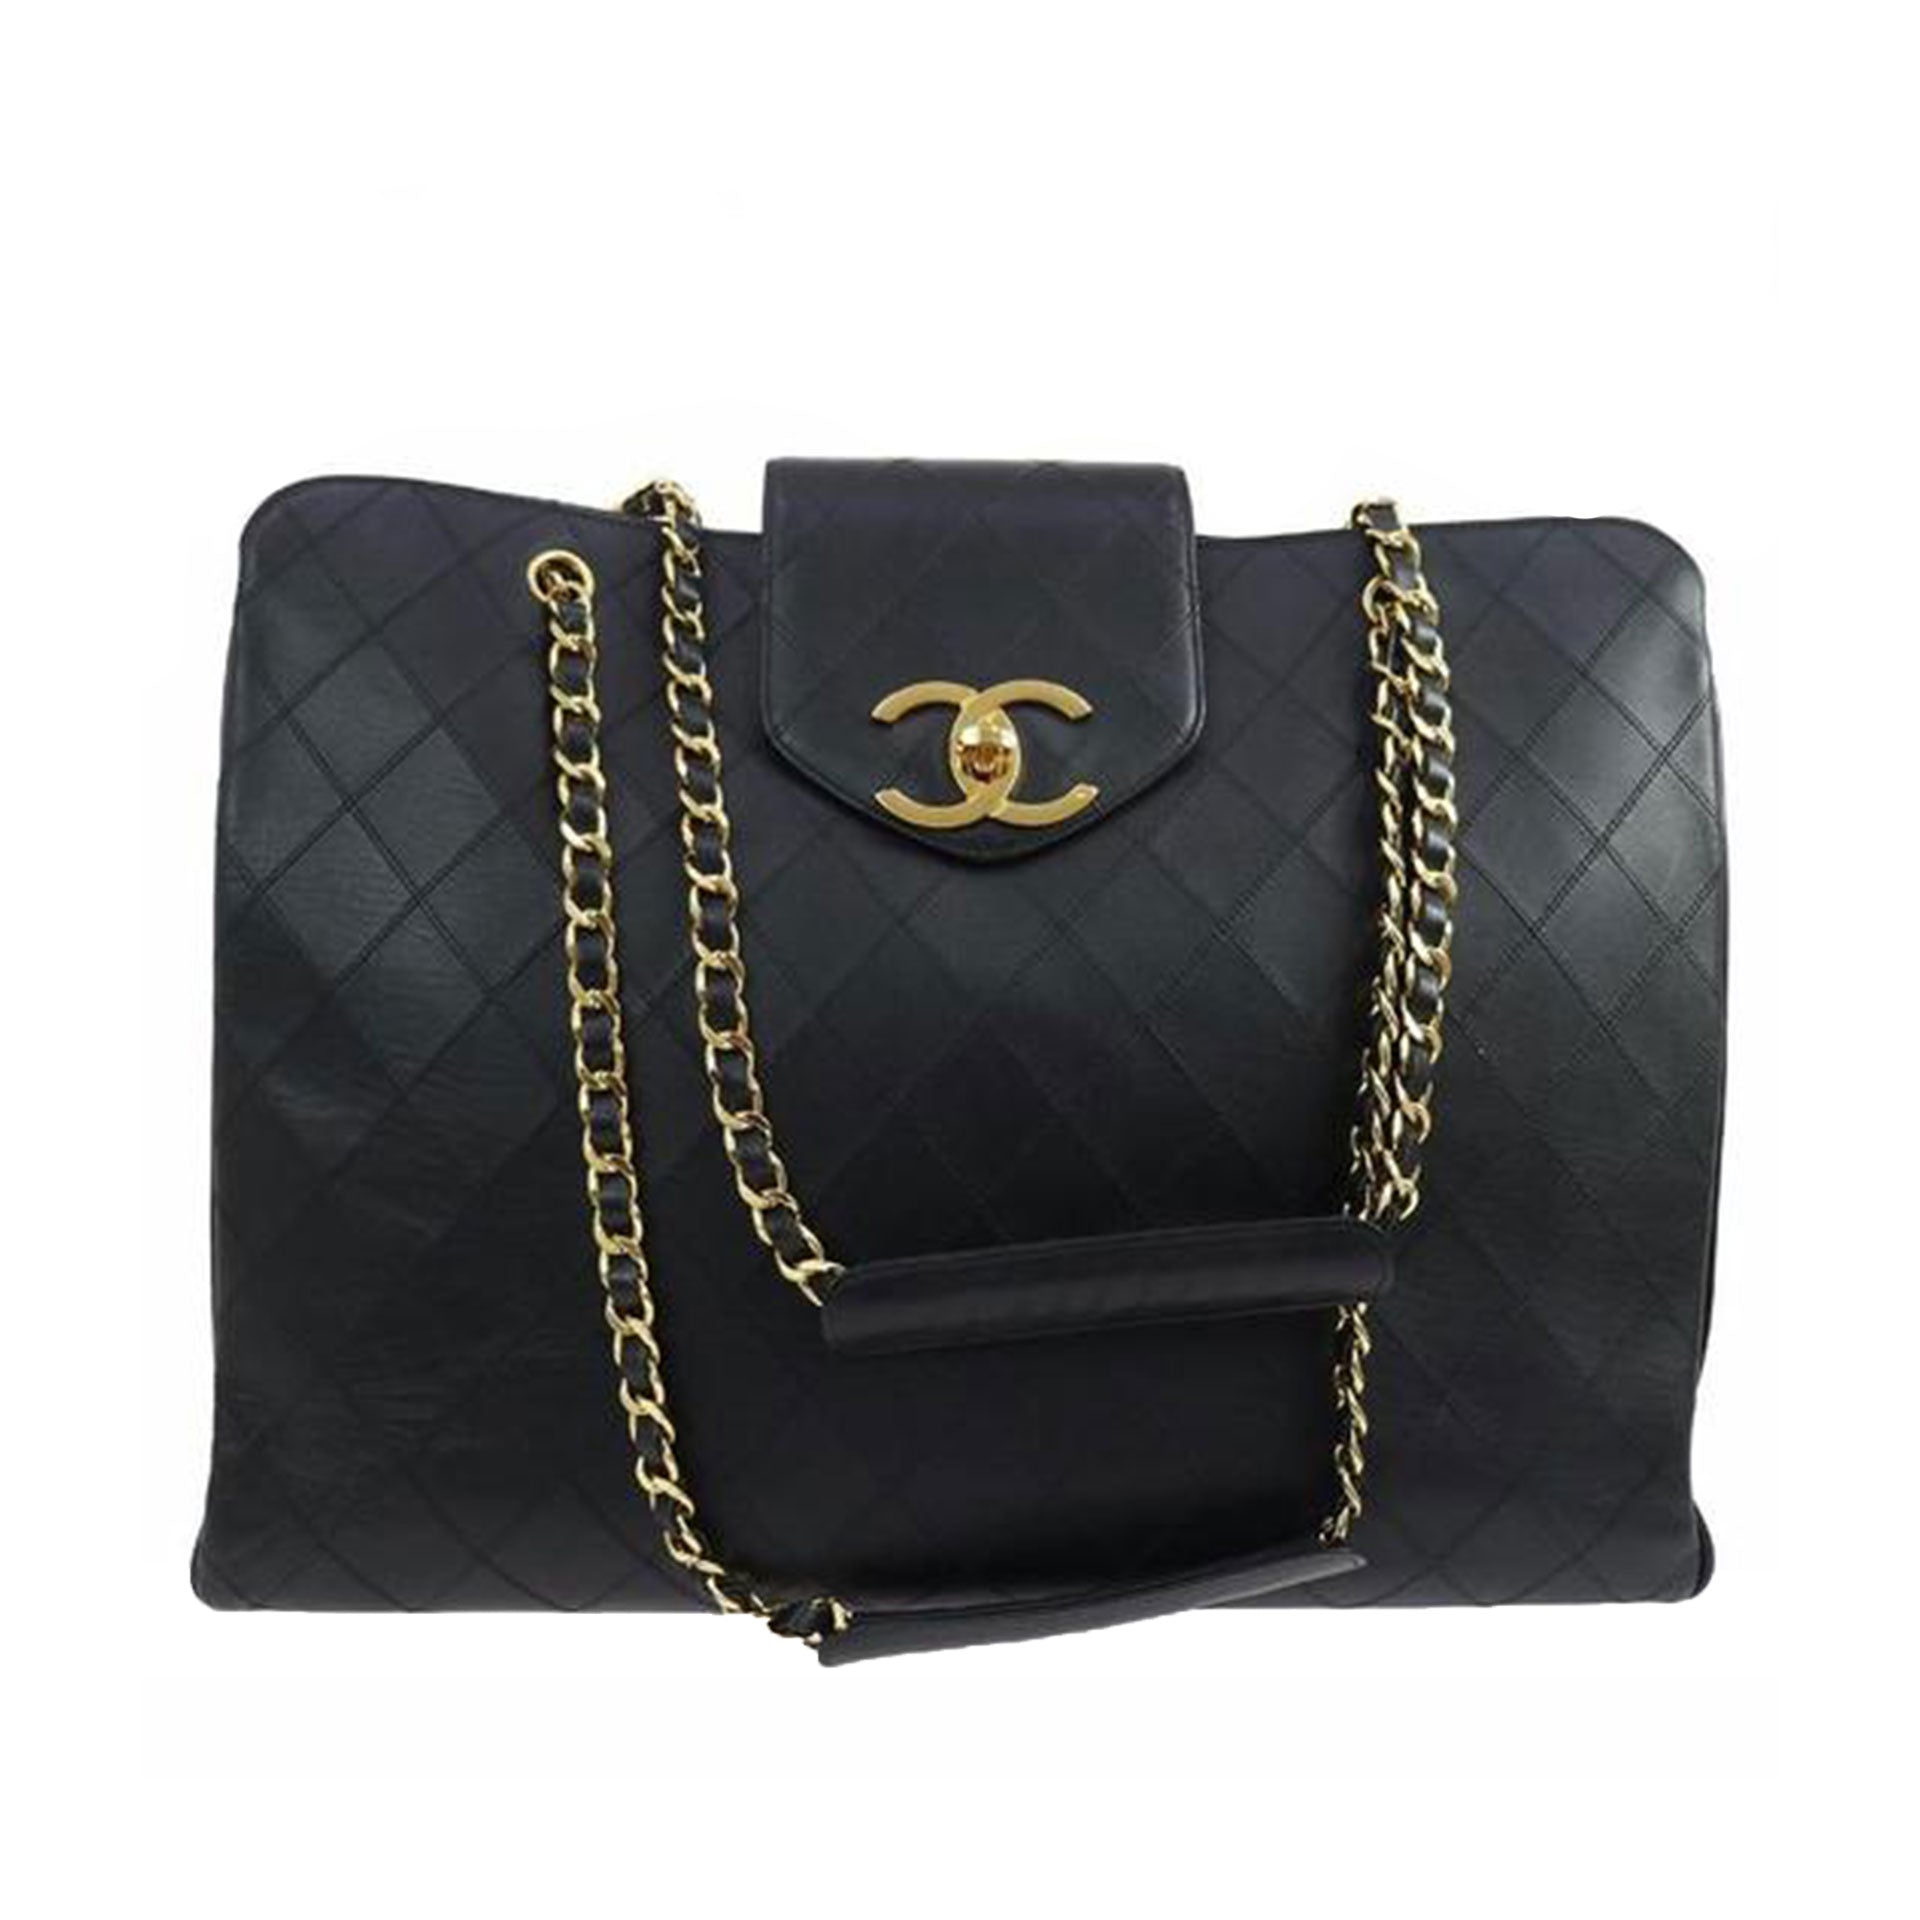 Chanel Vintage Quilted Shopper Lambskin Leather Bag